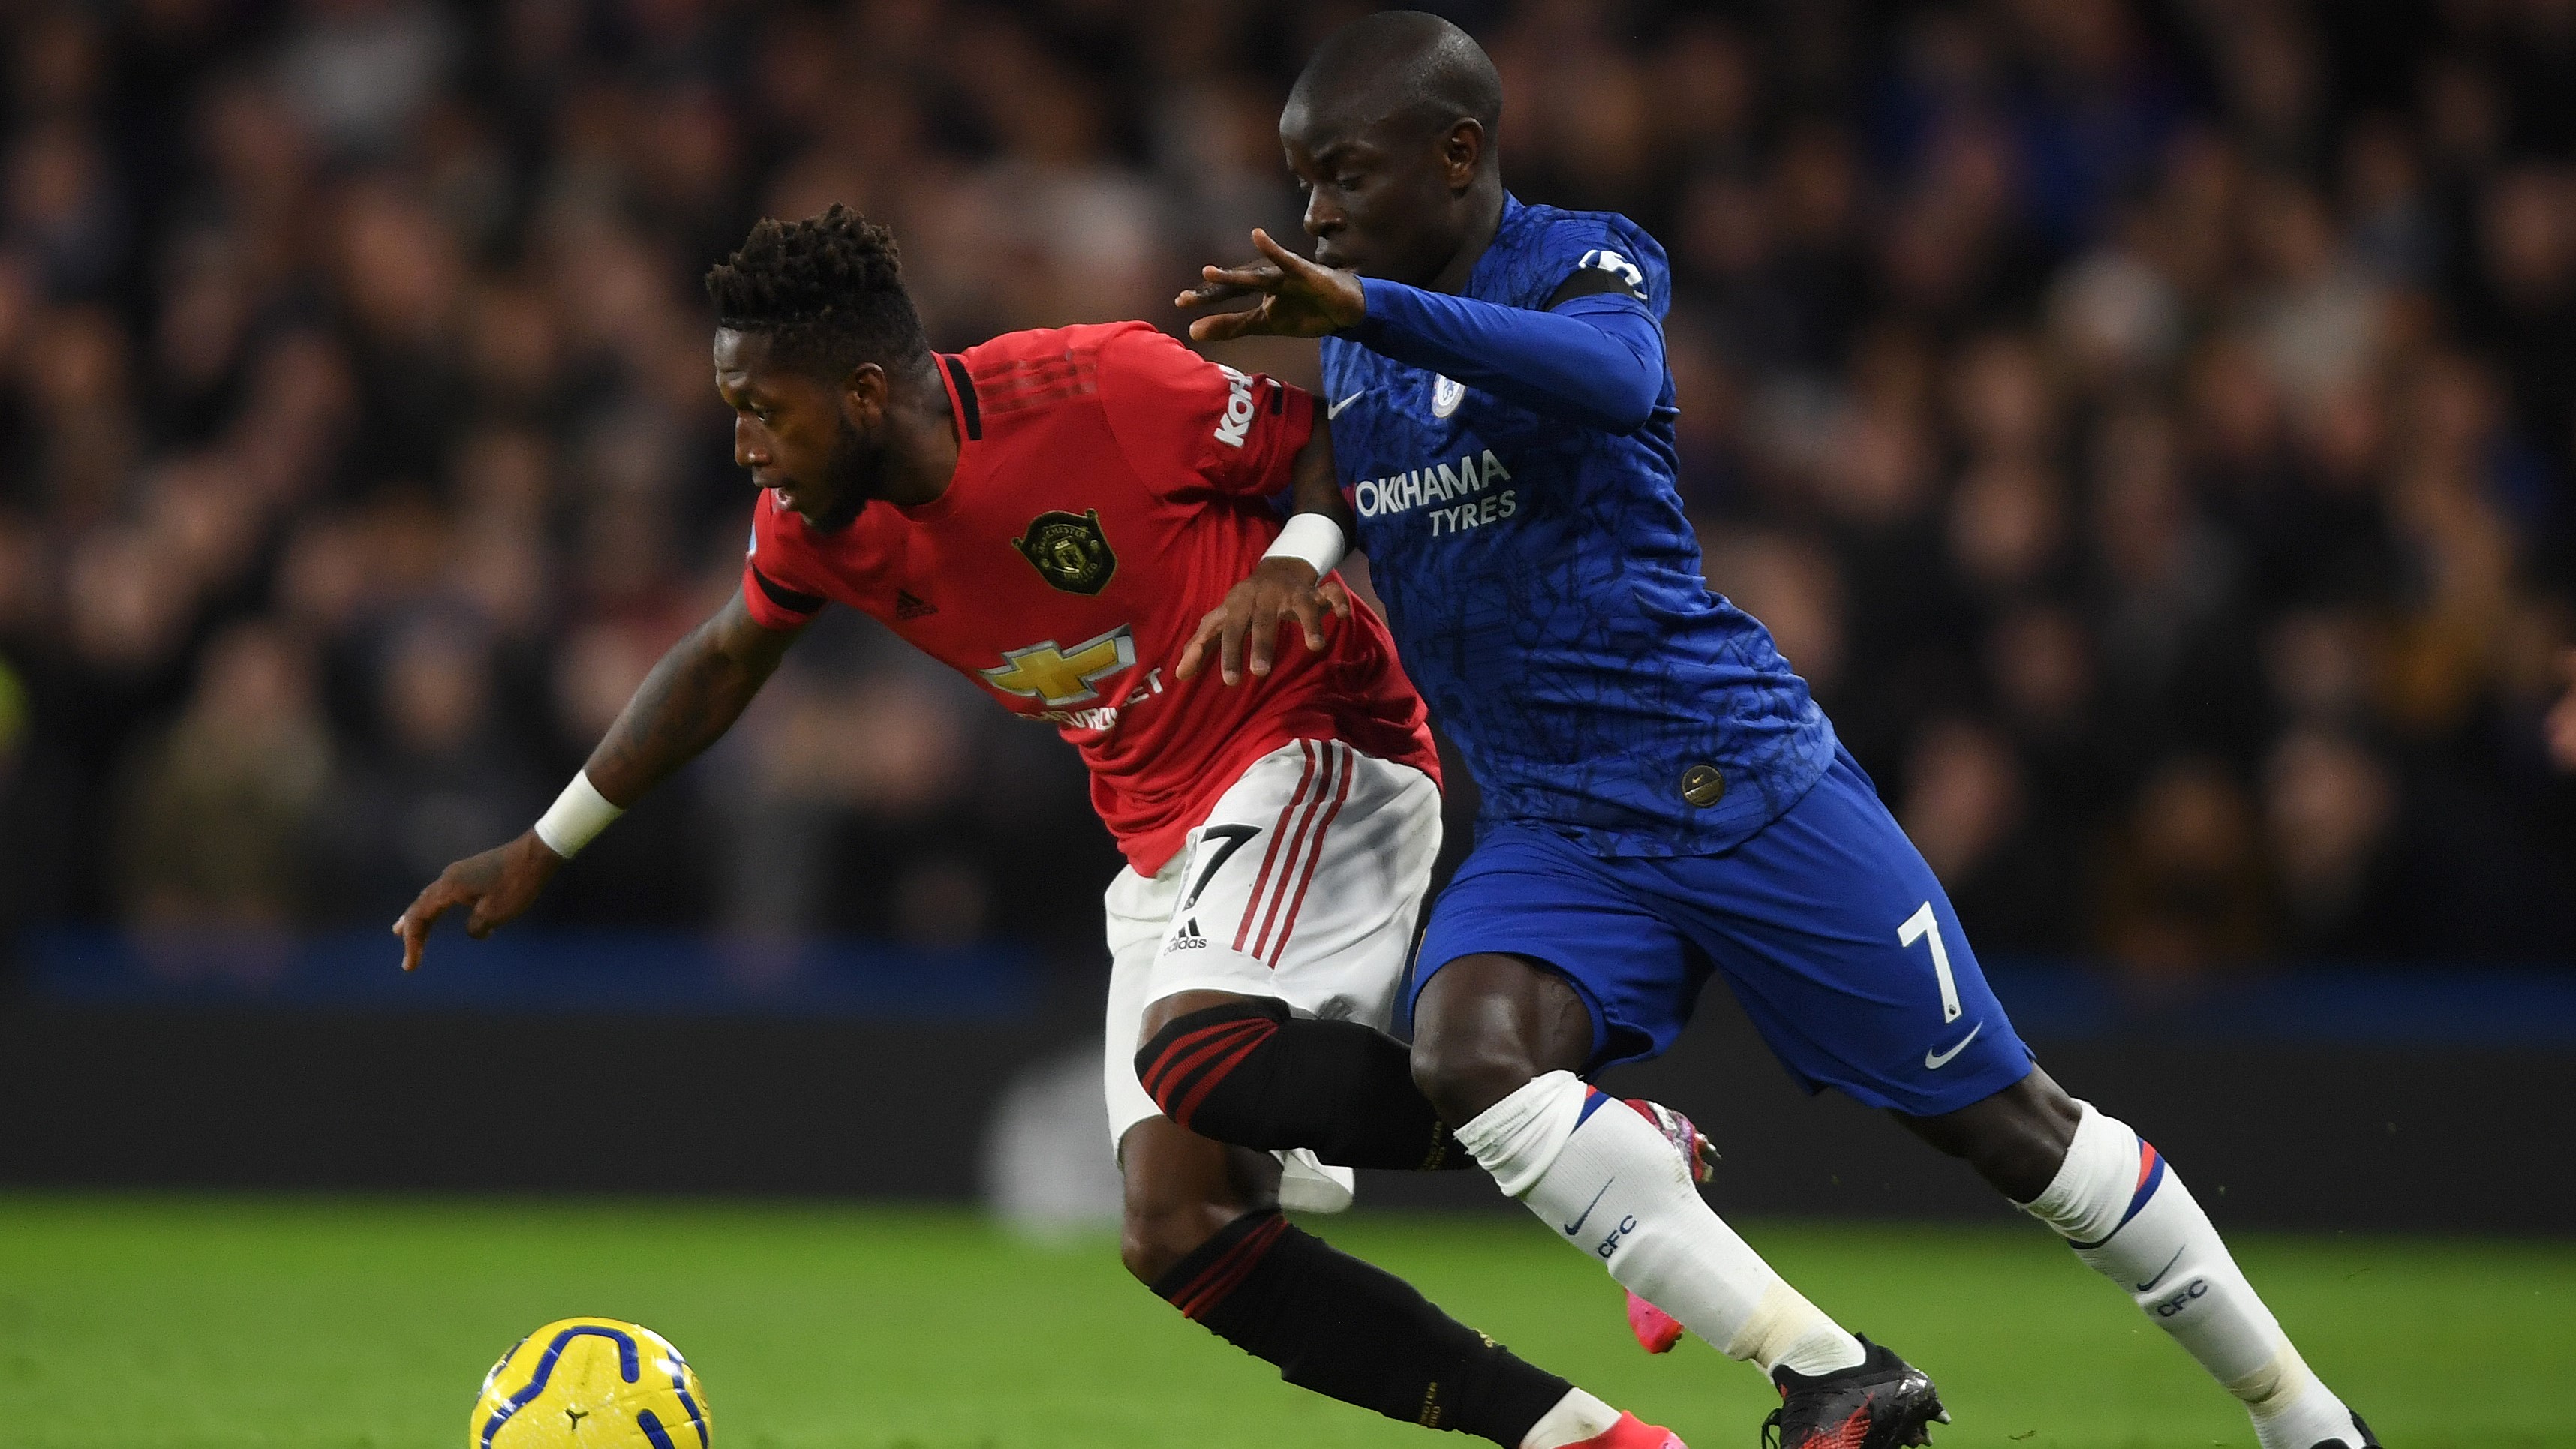 Man United vs Chelsea live stream how to watch the Premier League from